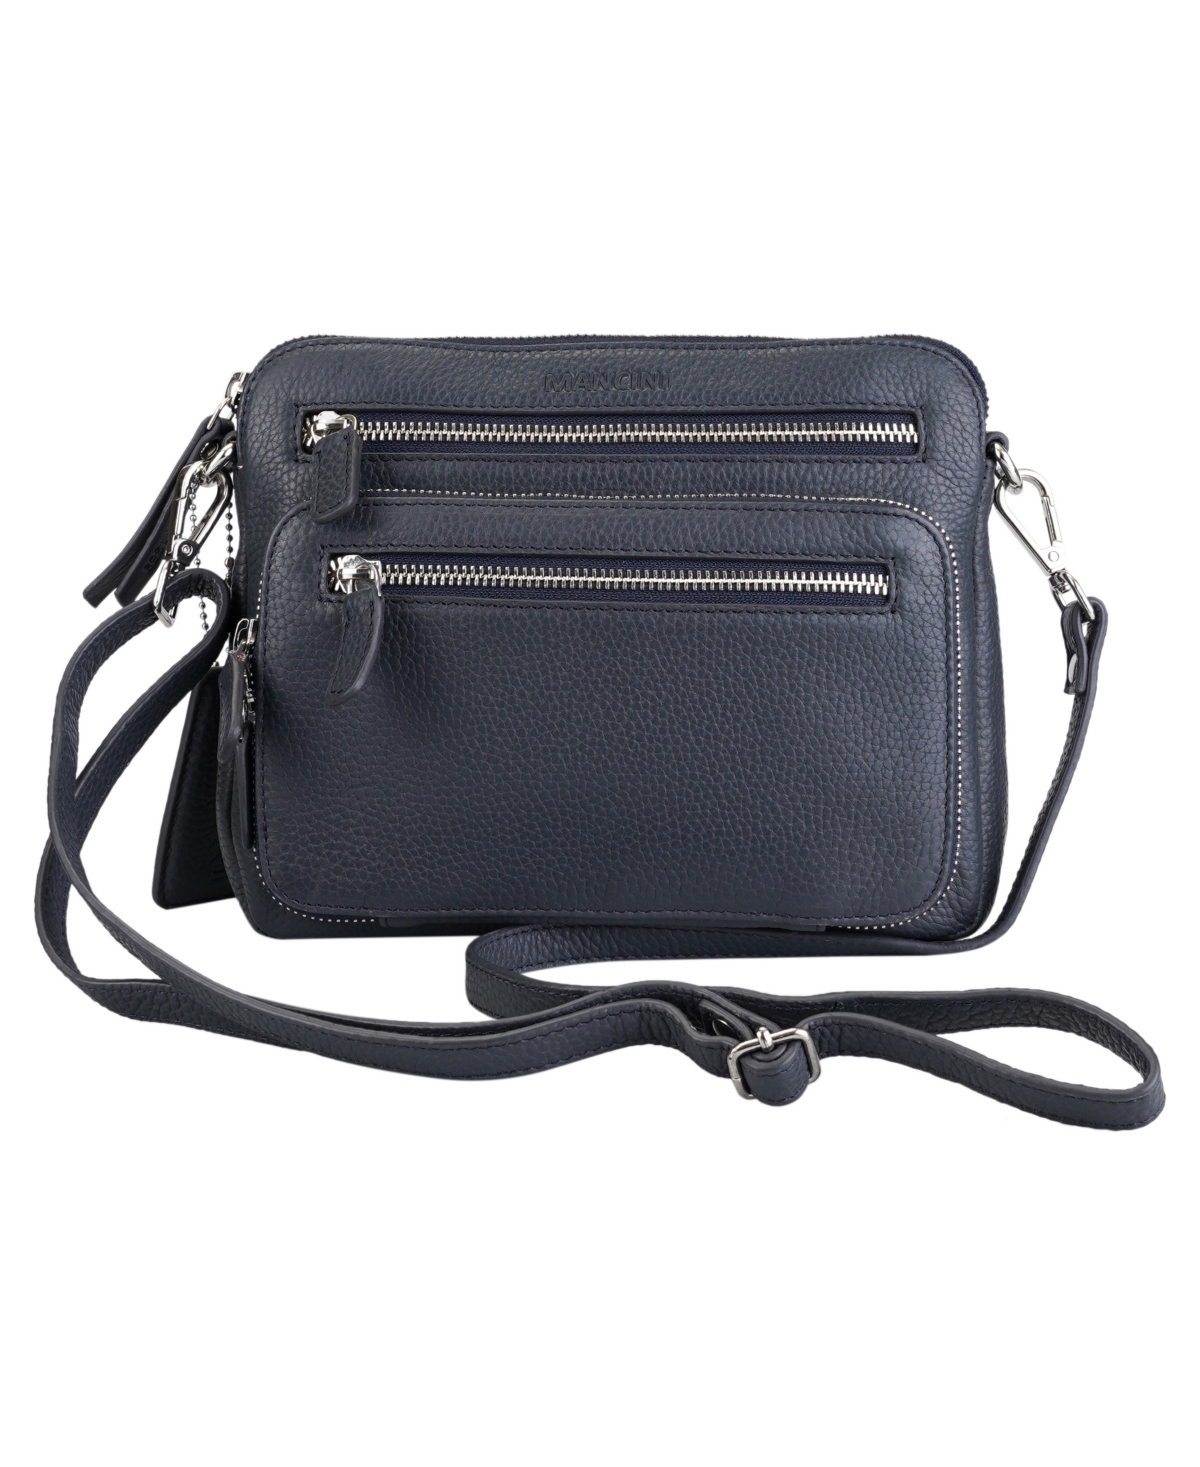 Mancini Pebbled Collection Valerie Leather Mini Crossbody Bag In Navy